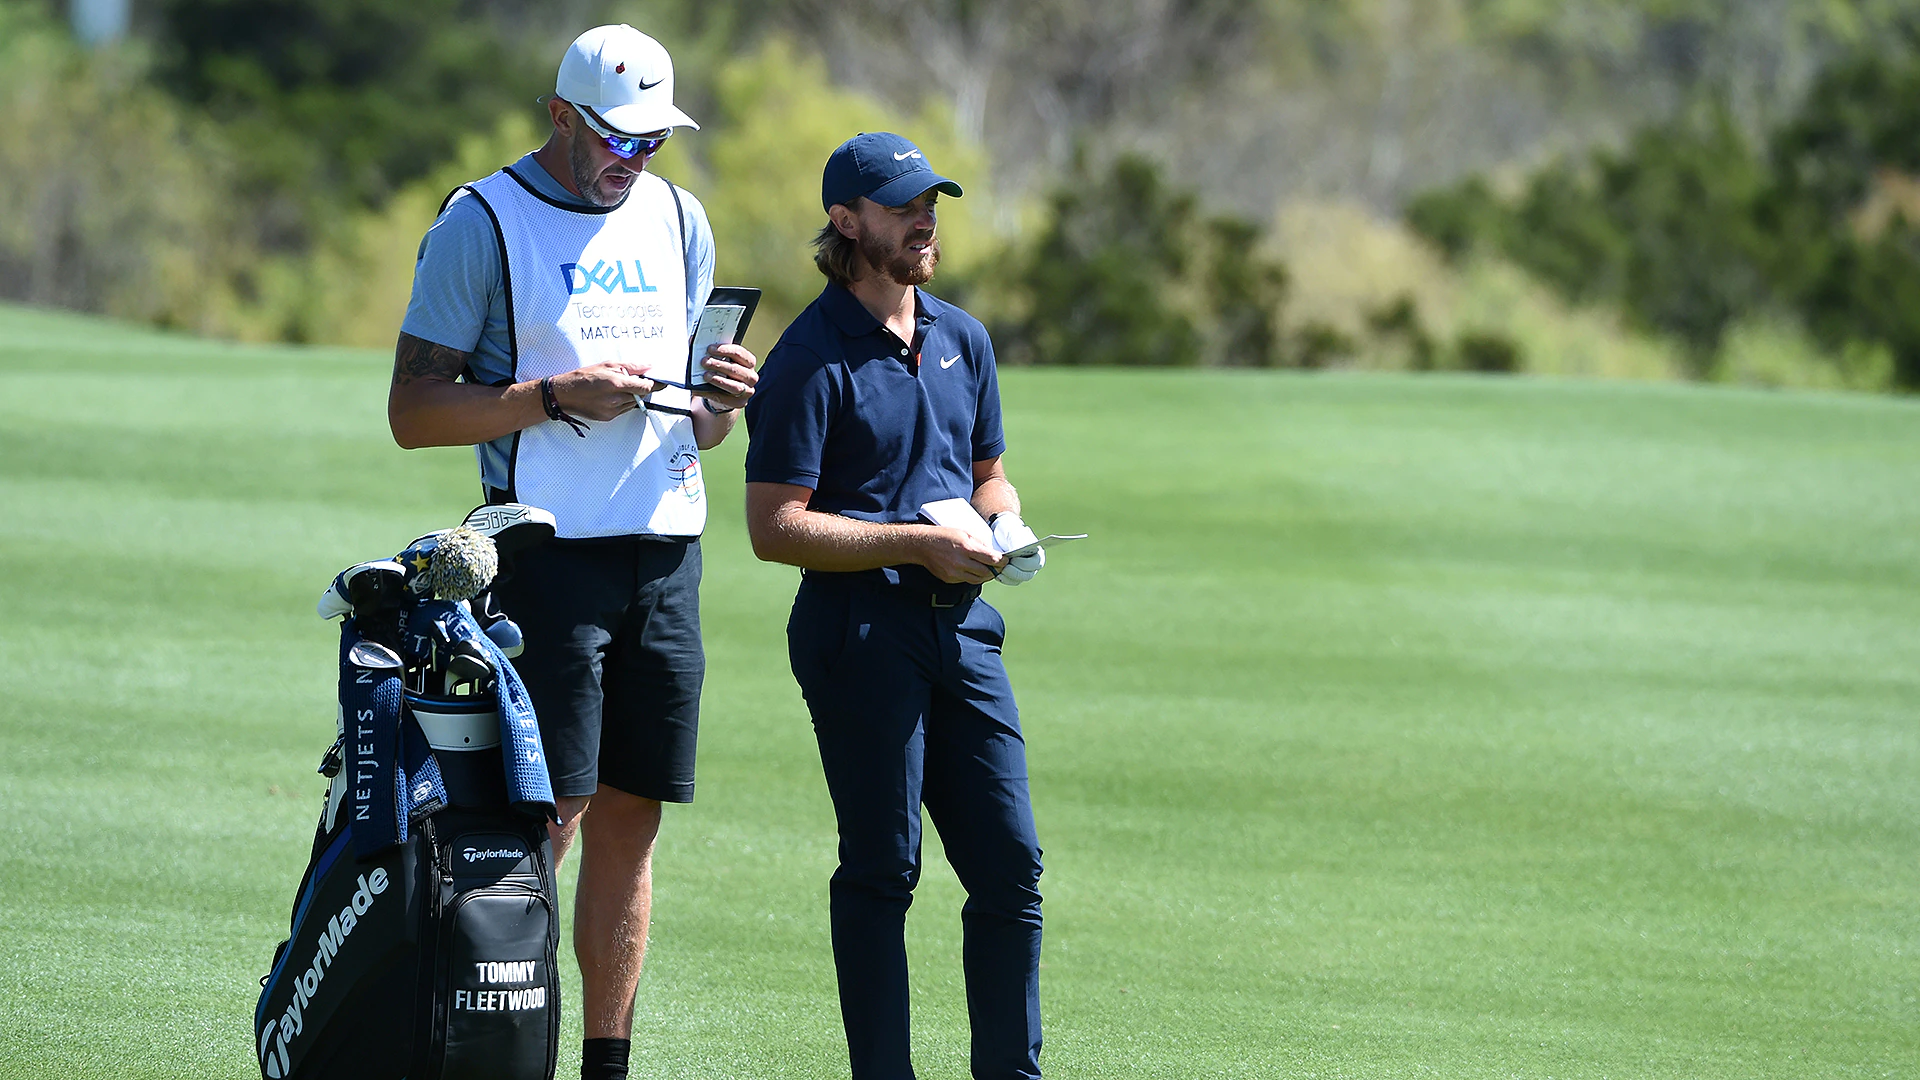 ‘He’s not got the lightest touch’: Tommy Fleetwood’s caddie breaks sign